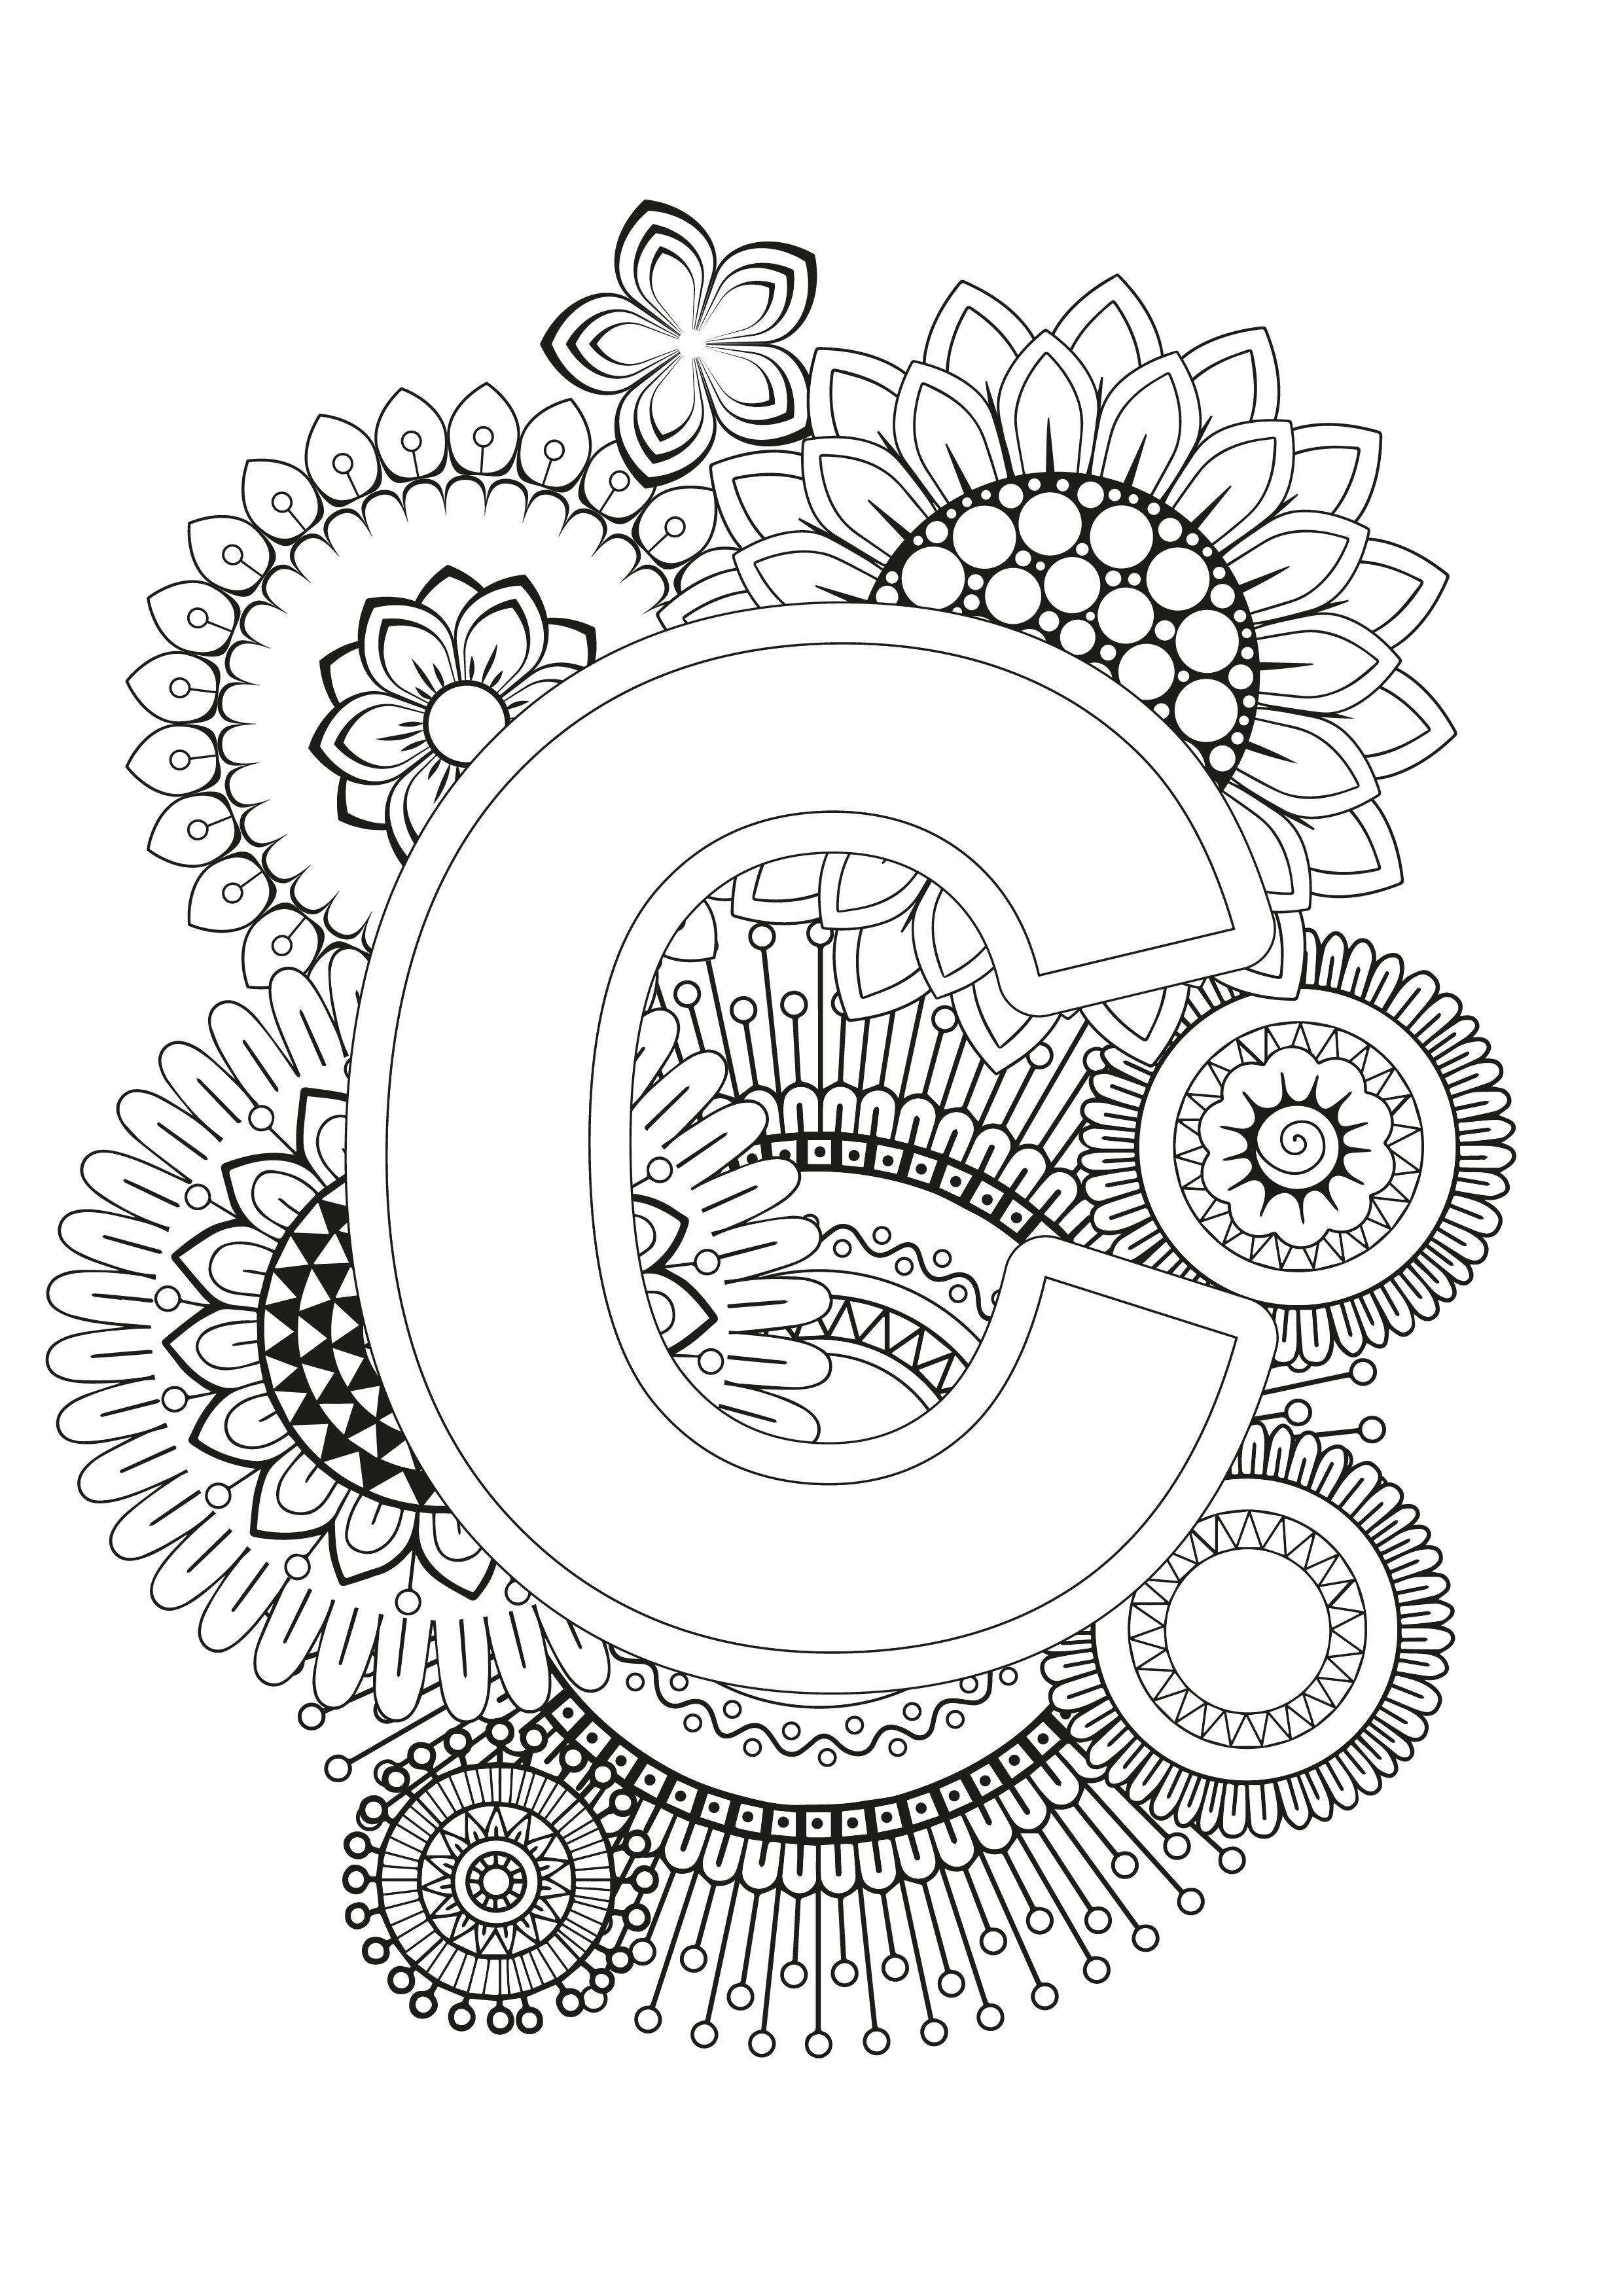 mindfulness coloring page alphabet coloring letters letter a ...